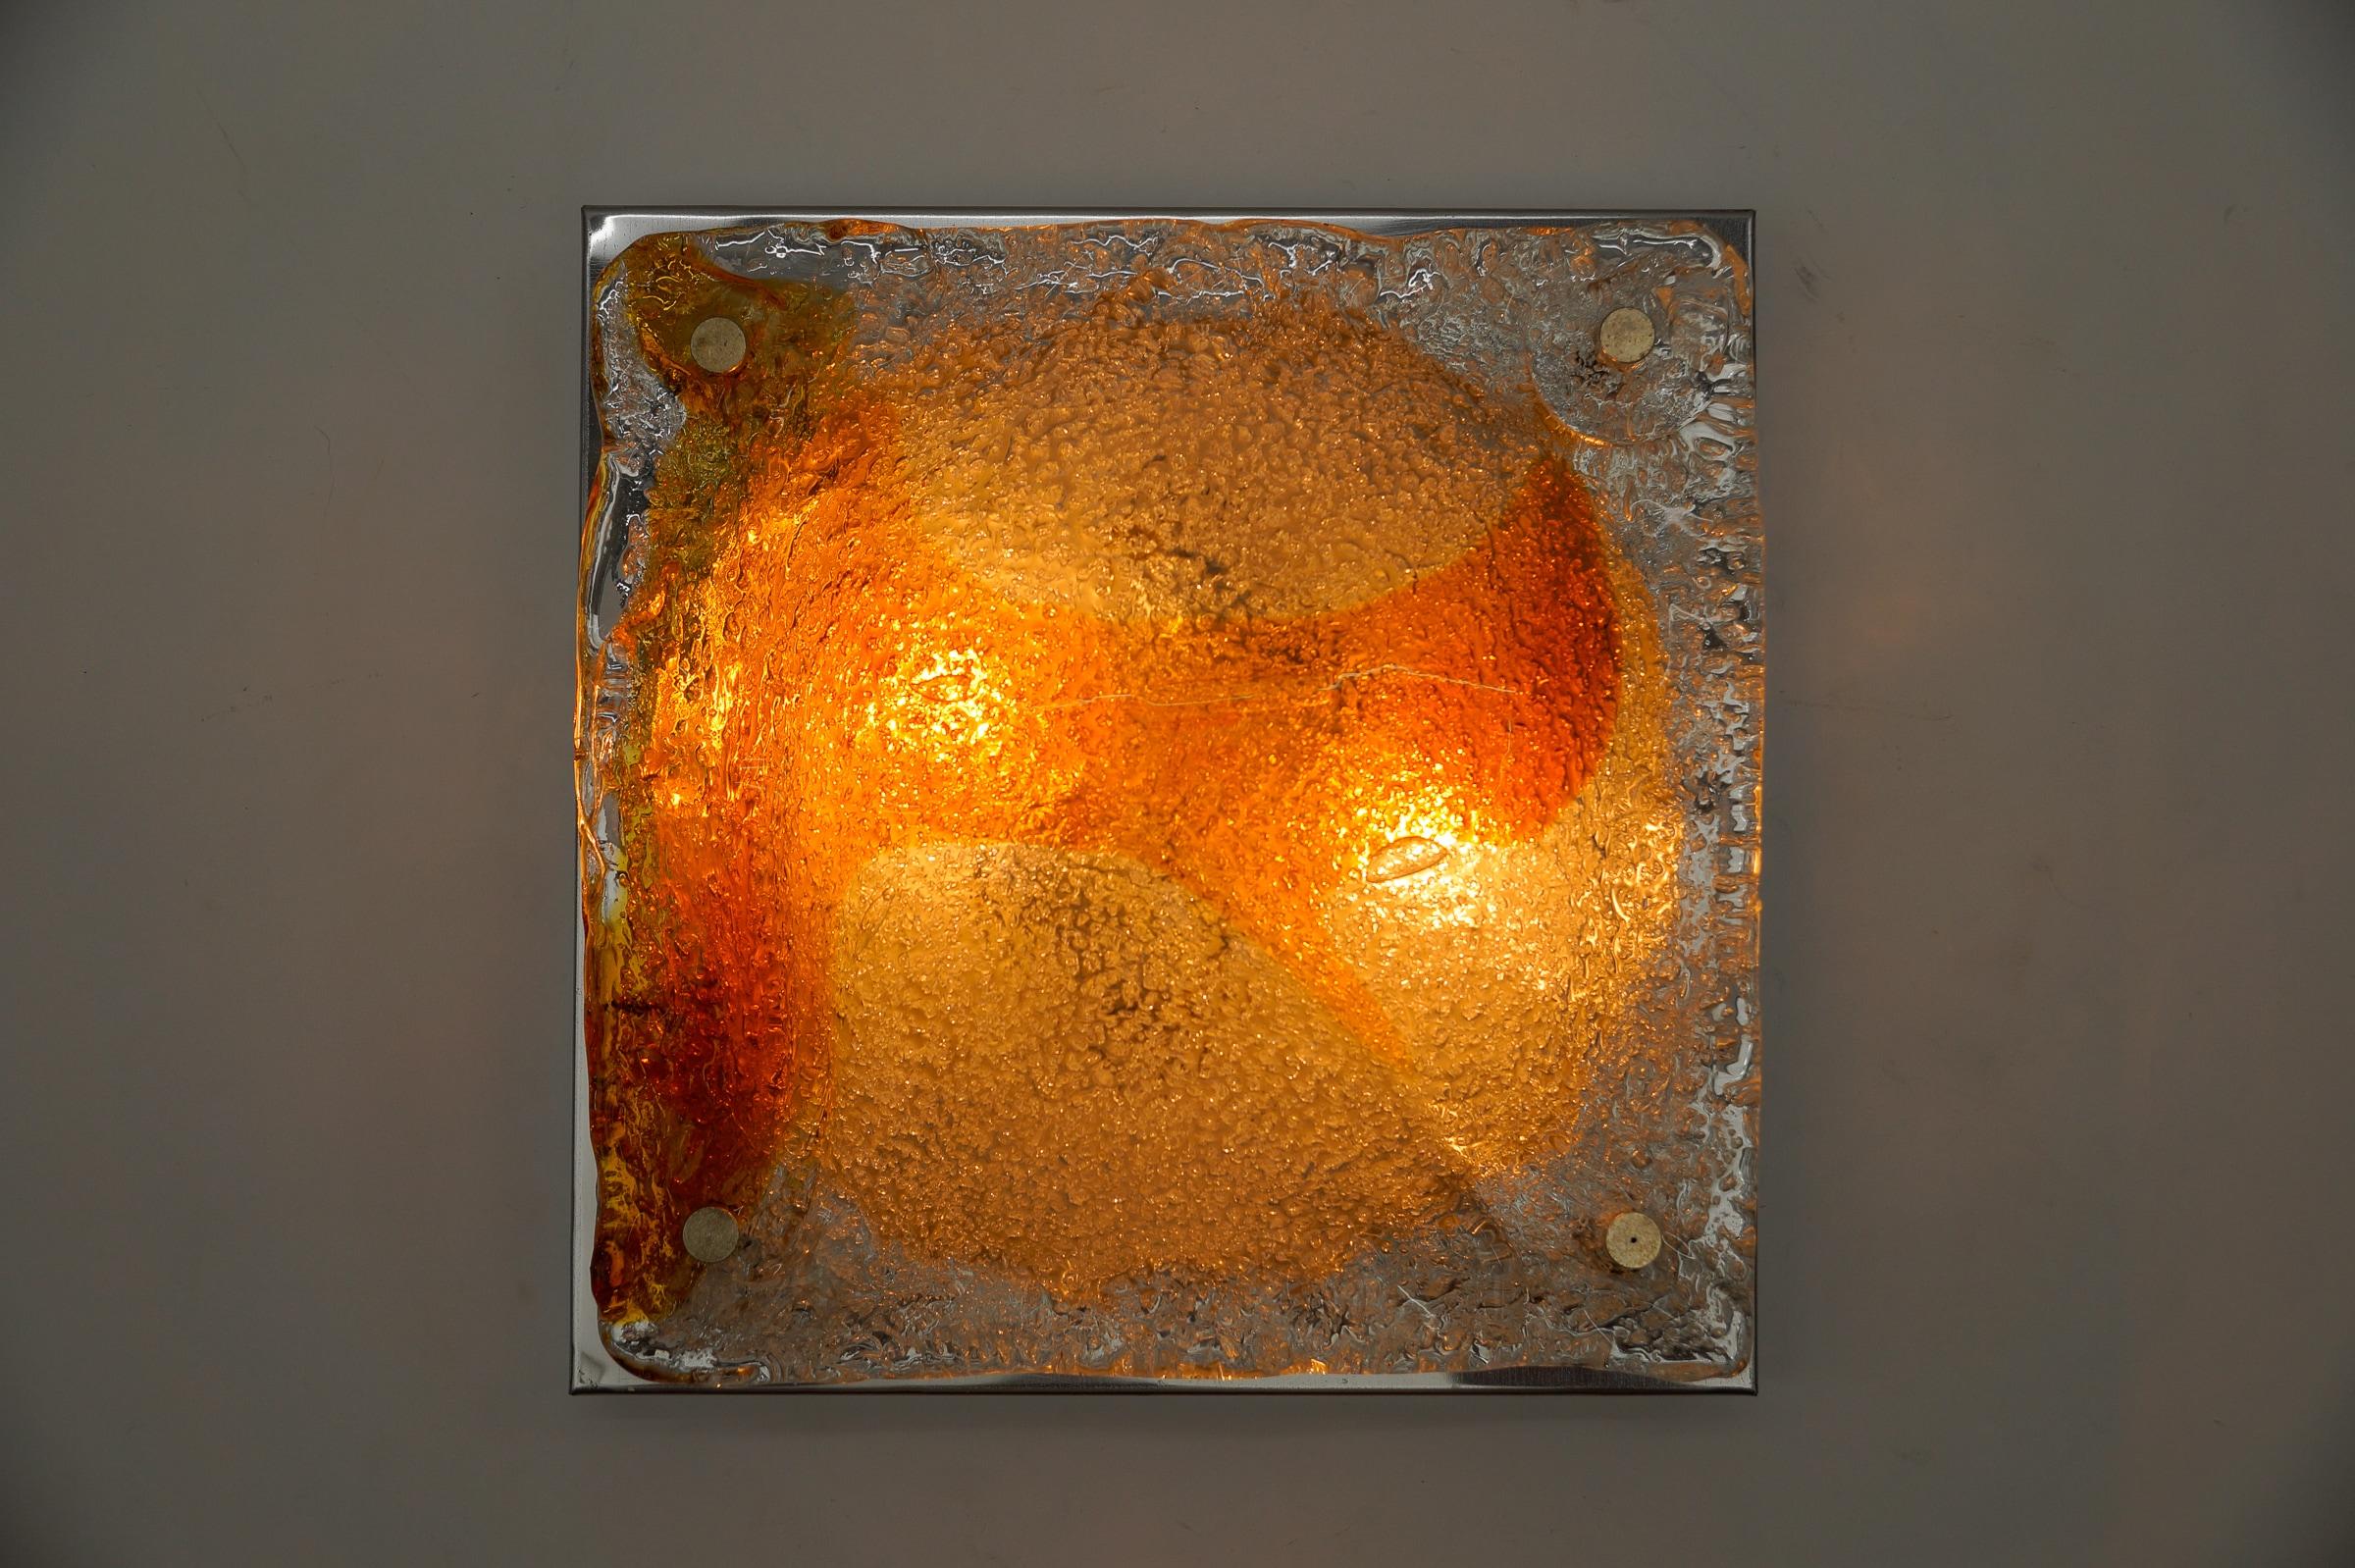 Orange Murano Glass Flush Mount Sconces, Italy, 1960s

The wall lamps come with 1 x E14 / E15 Edison screw fit bulb holder, is wired and in working condition. It runs both on 110/230 Volt. Delivery without bulb.

Our lamps are checked, cleaned and